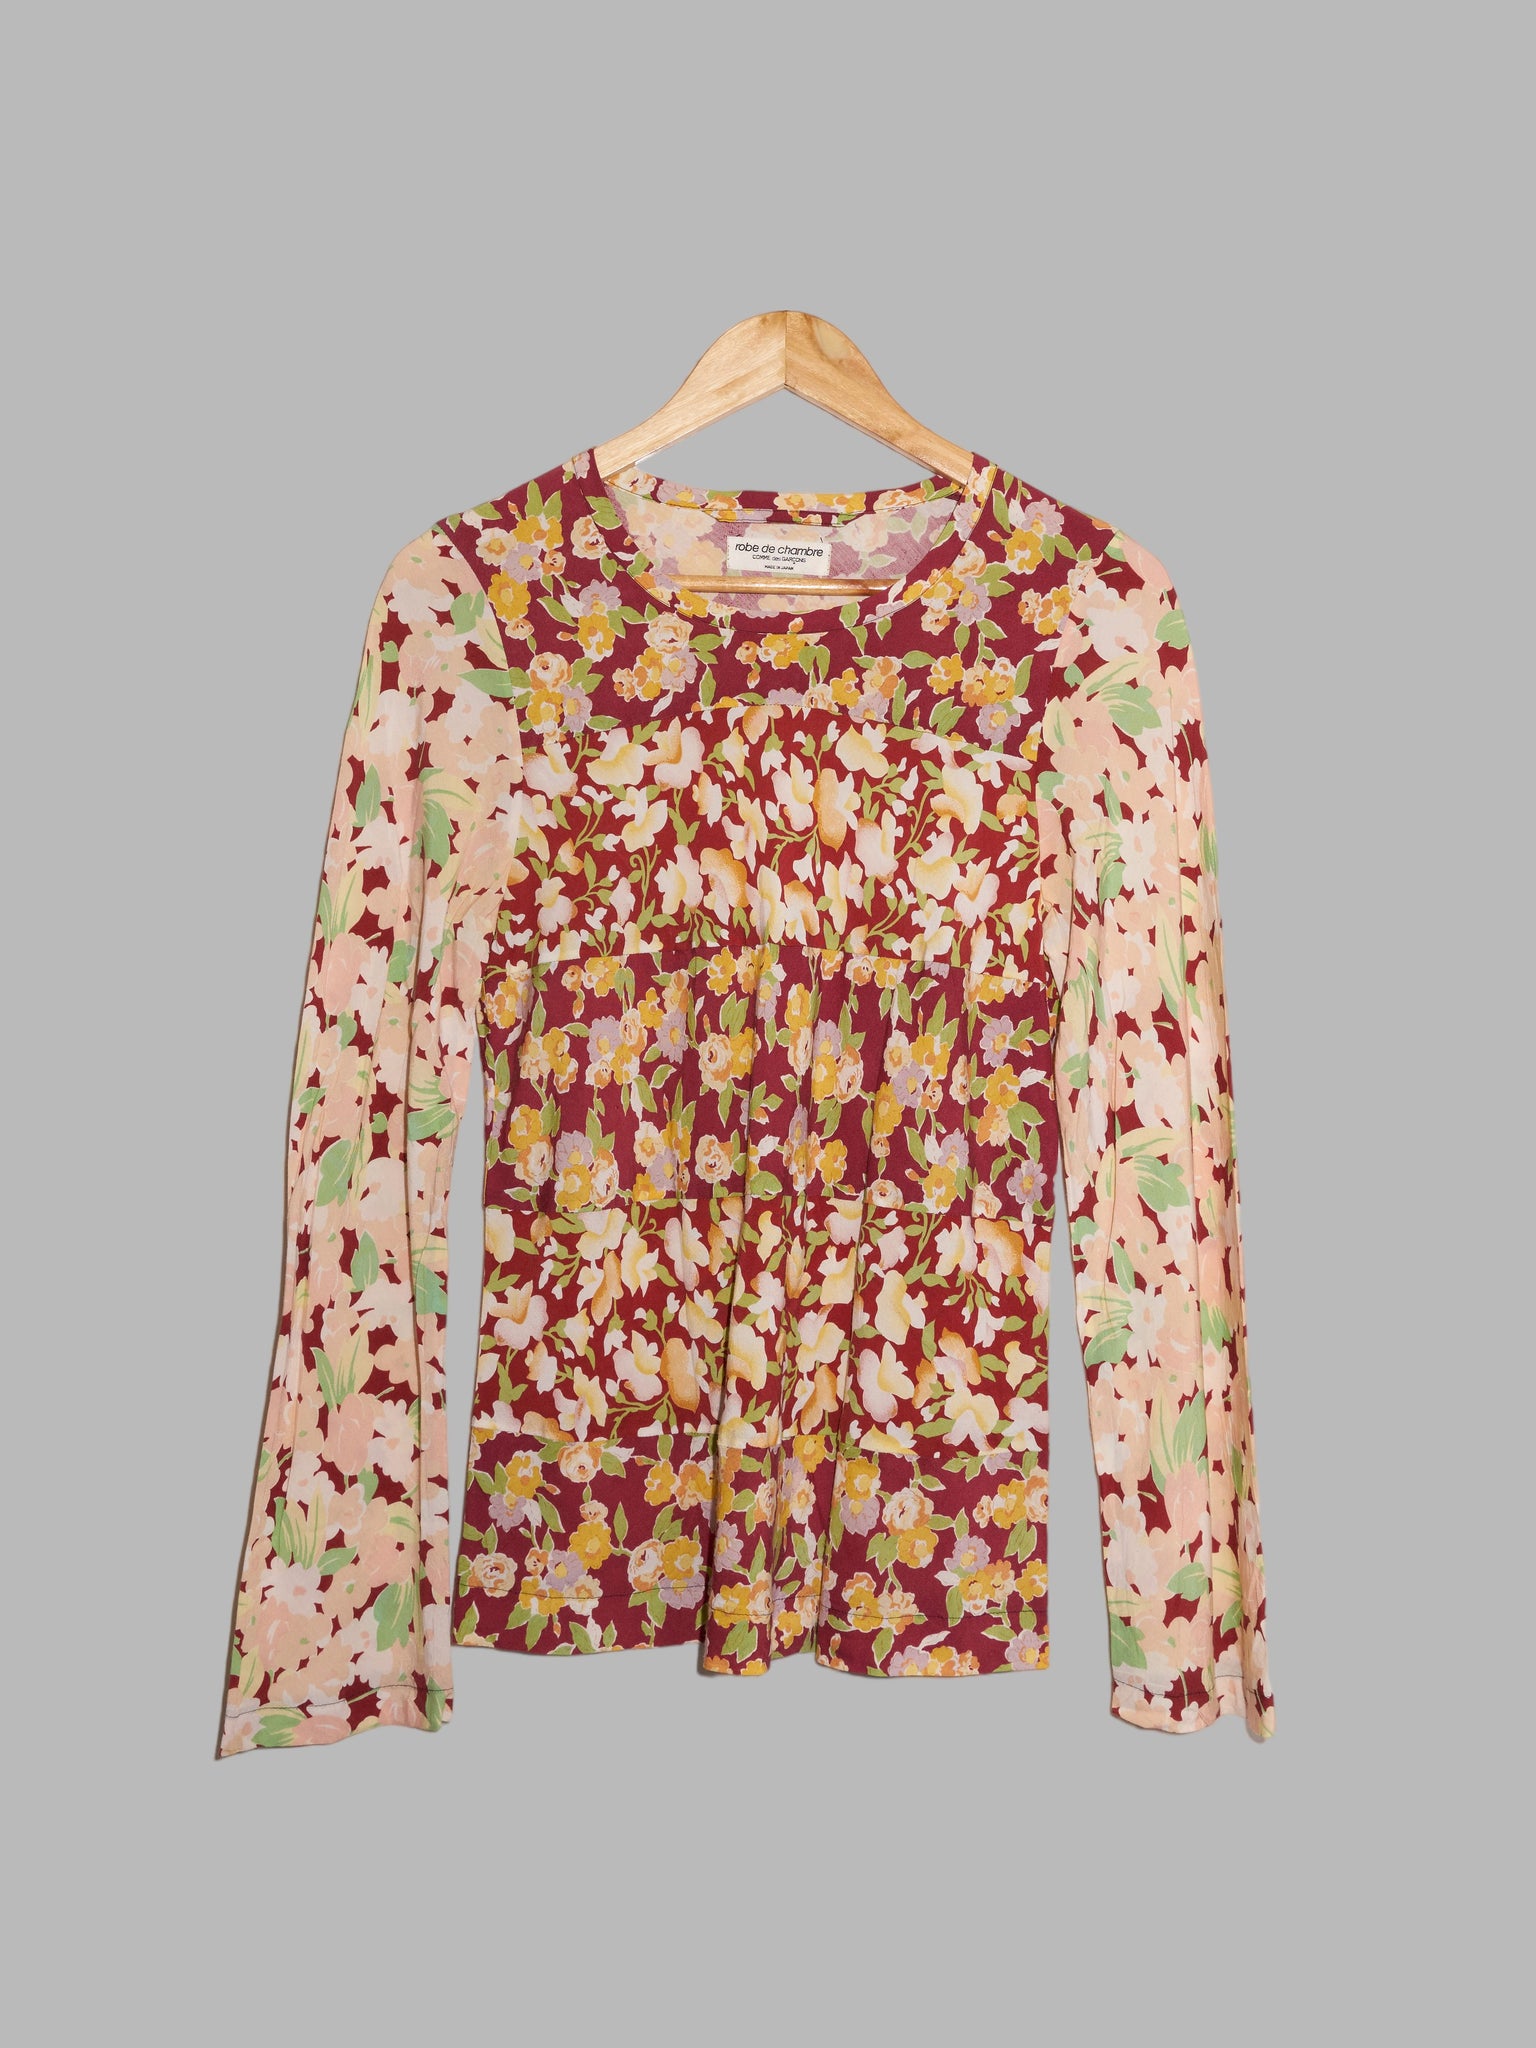 Comme des Garcons 1993 burgundy rayon floral print long sleeve top